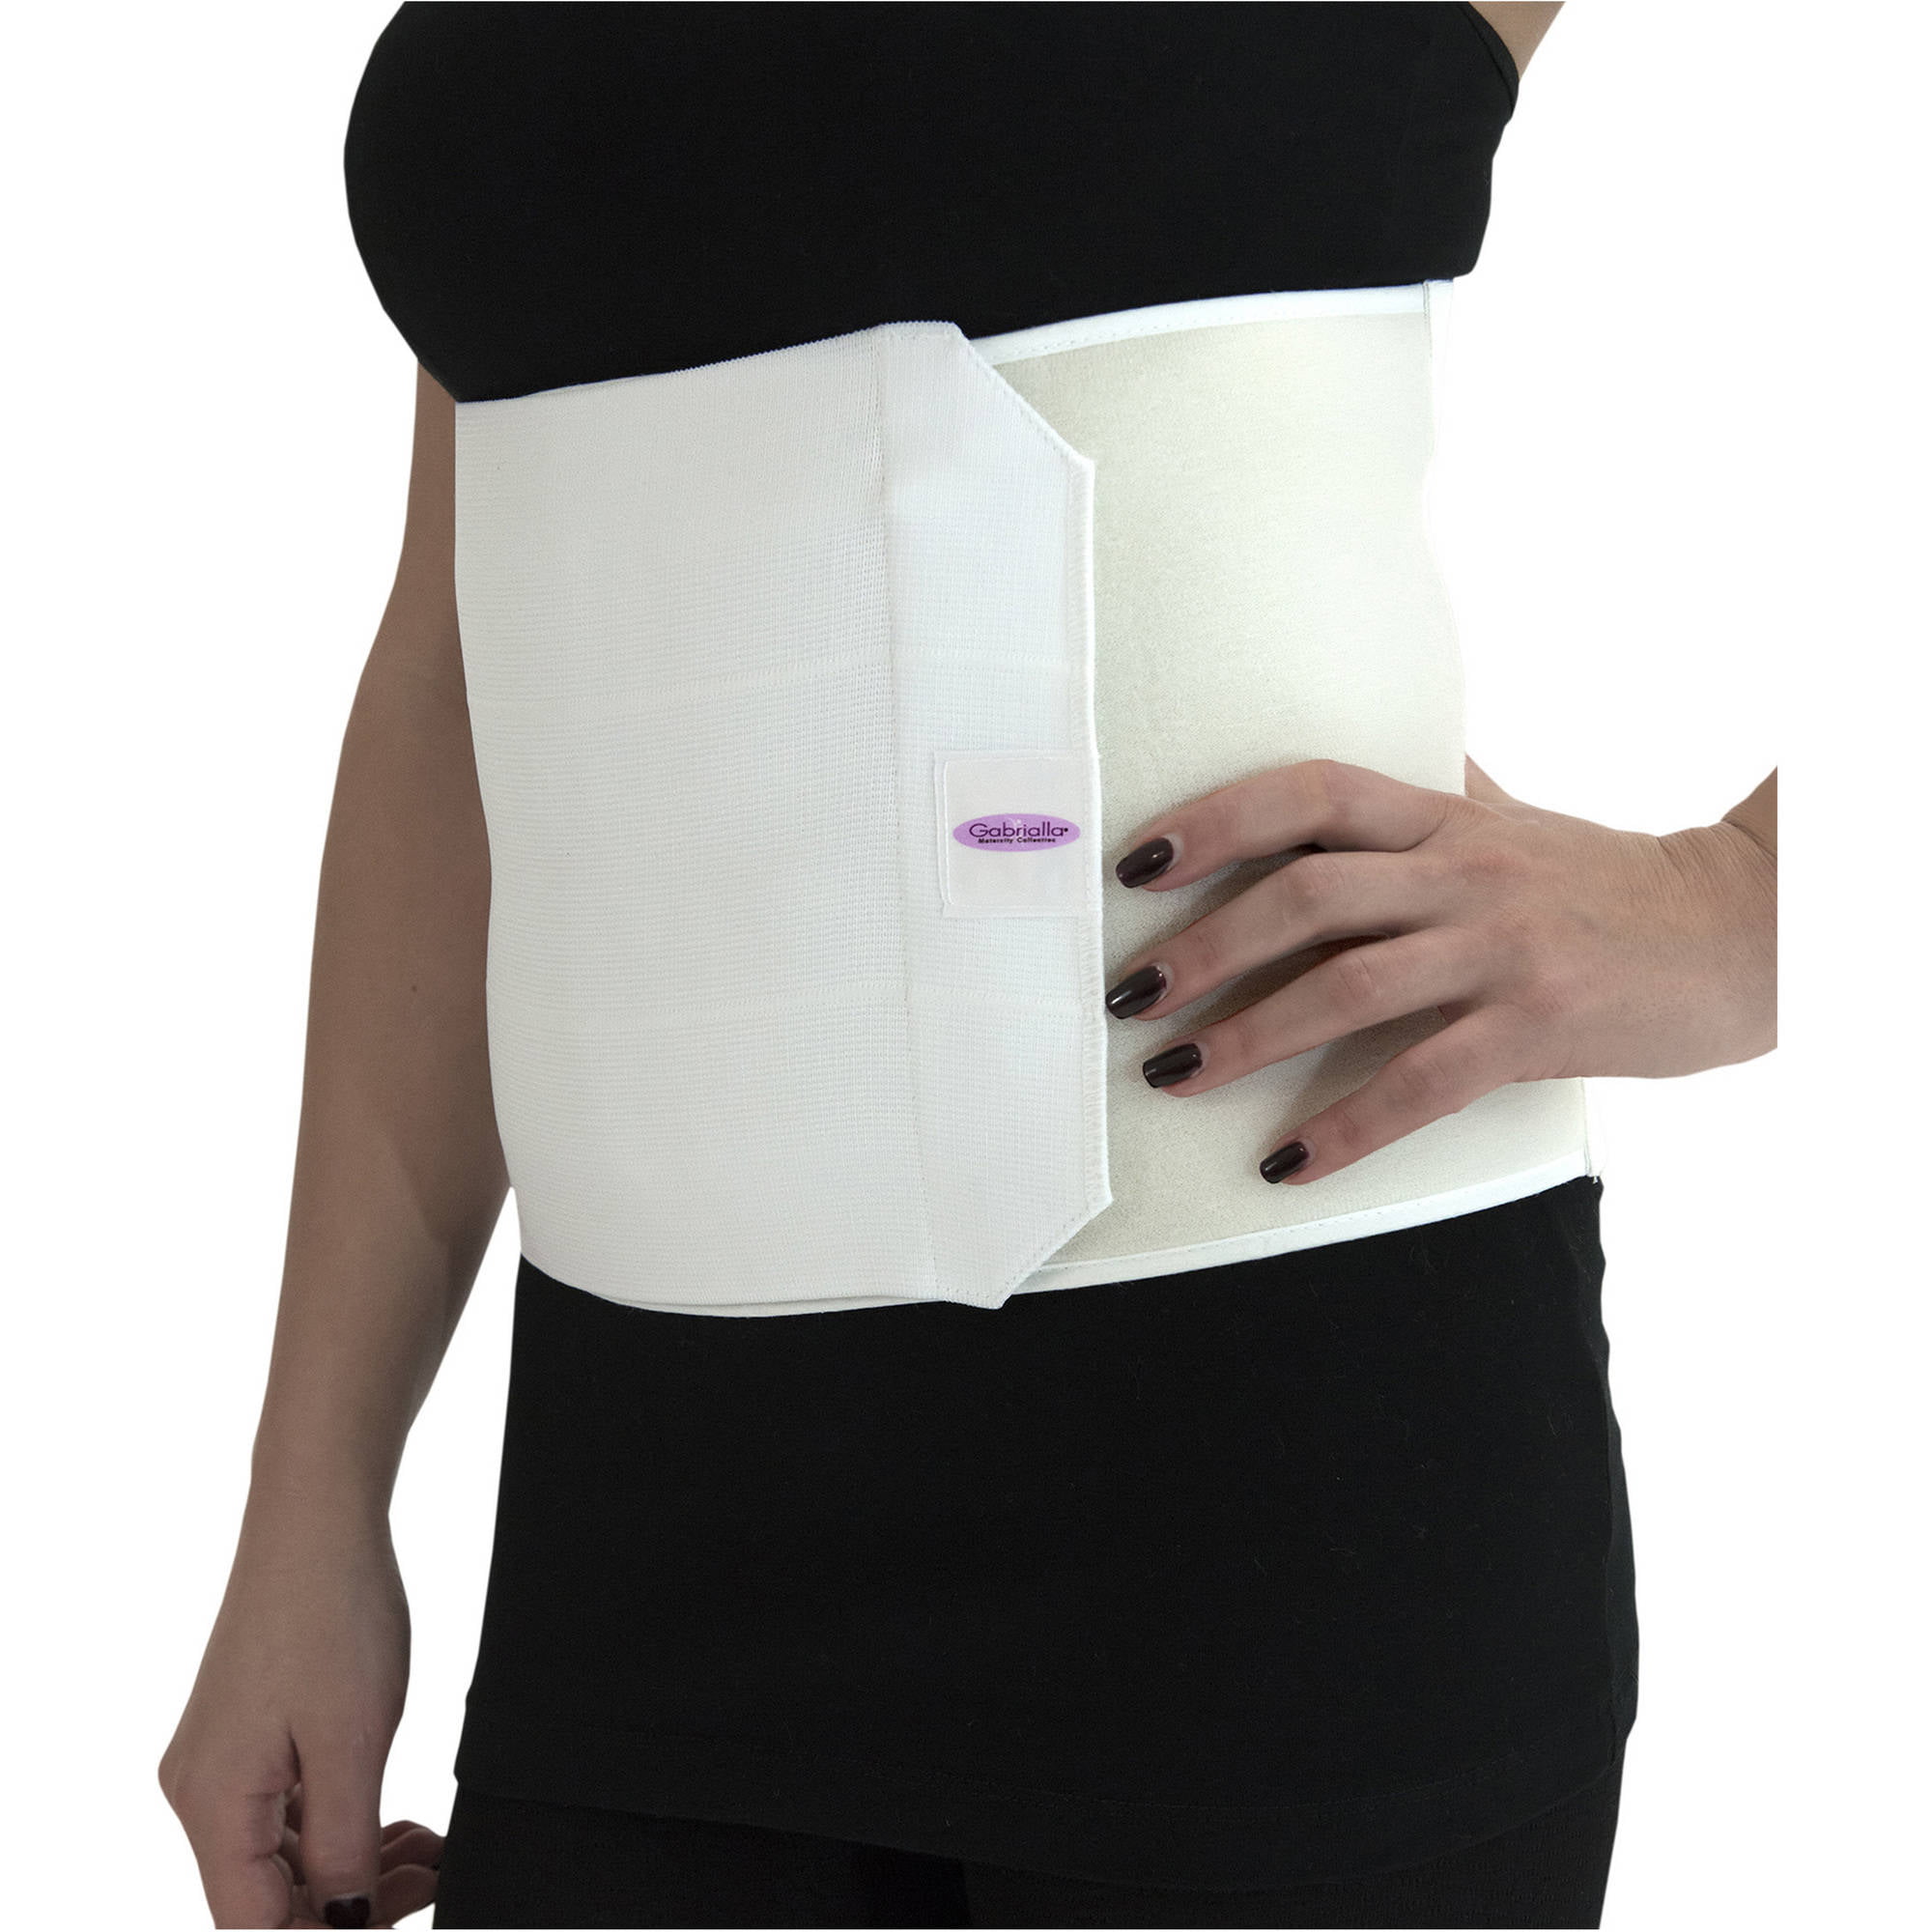 Walgreens Abdominal Support Surgical Binder Moderate Support S/M